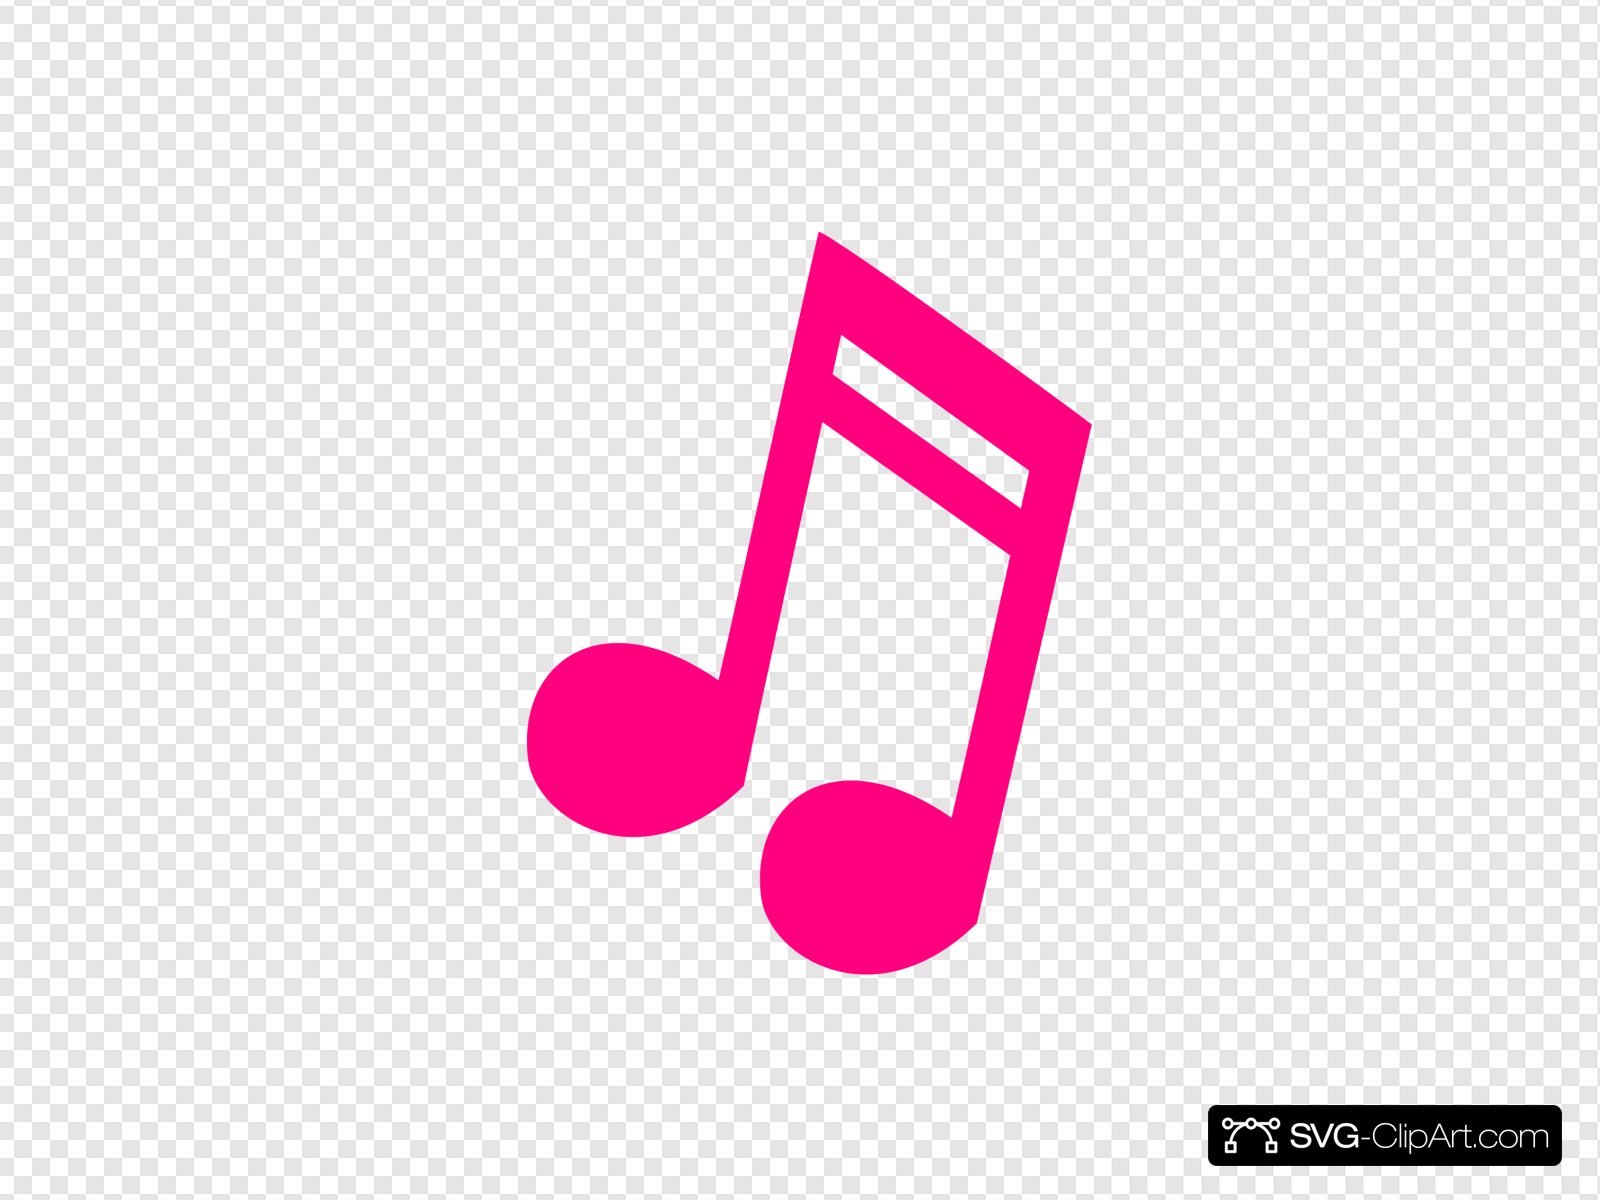 Hot Pink Music Note Clip art, Icon and SVG.